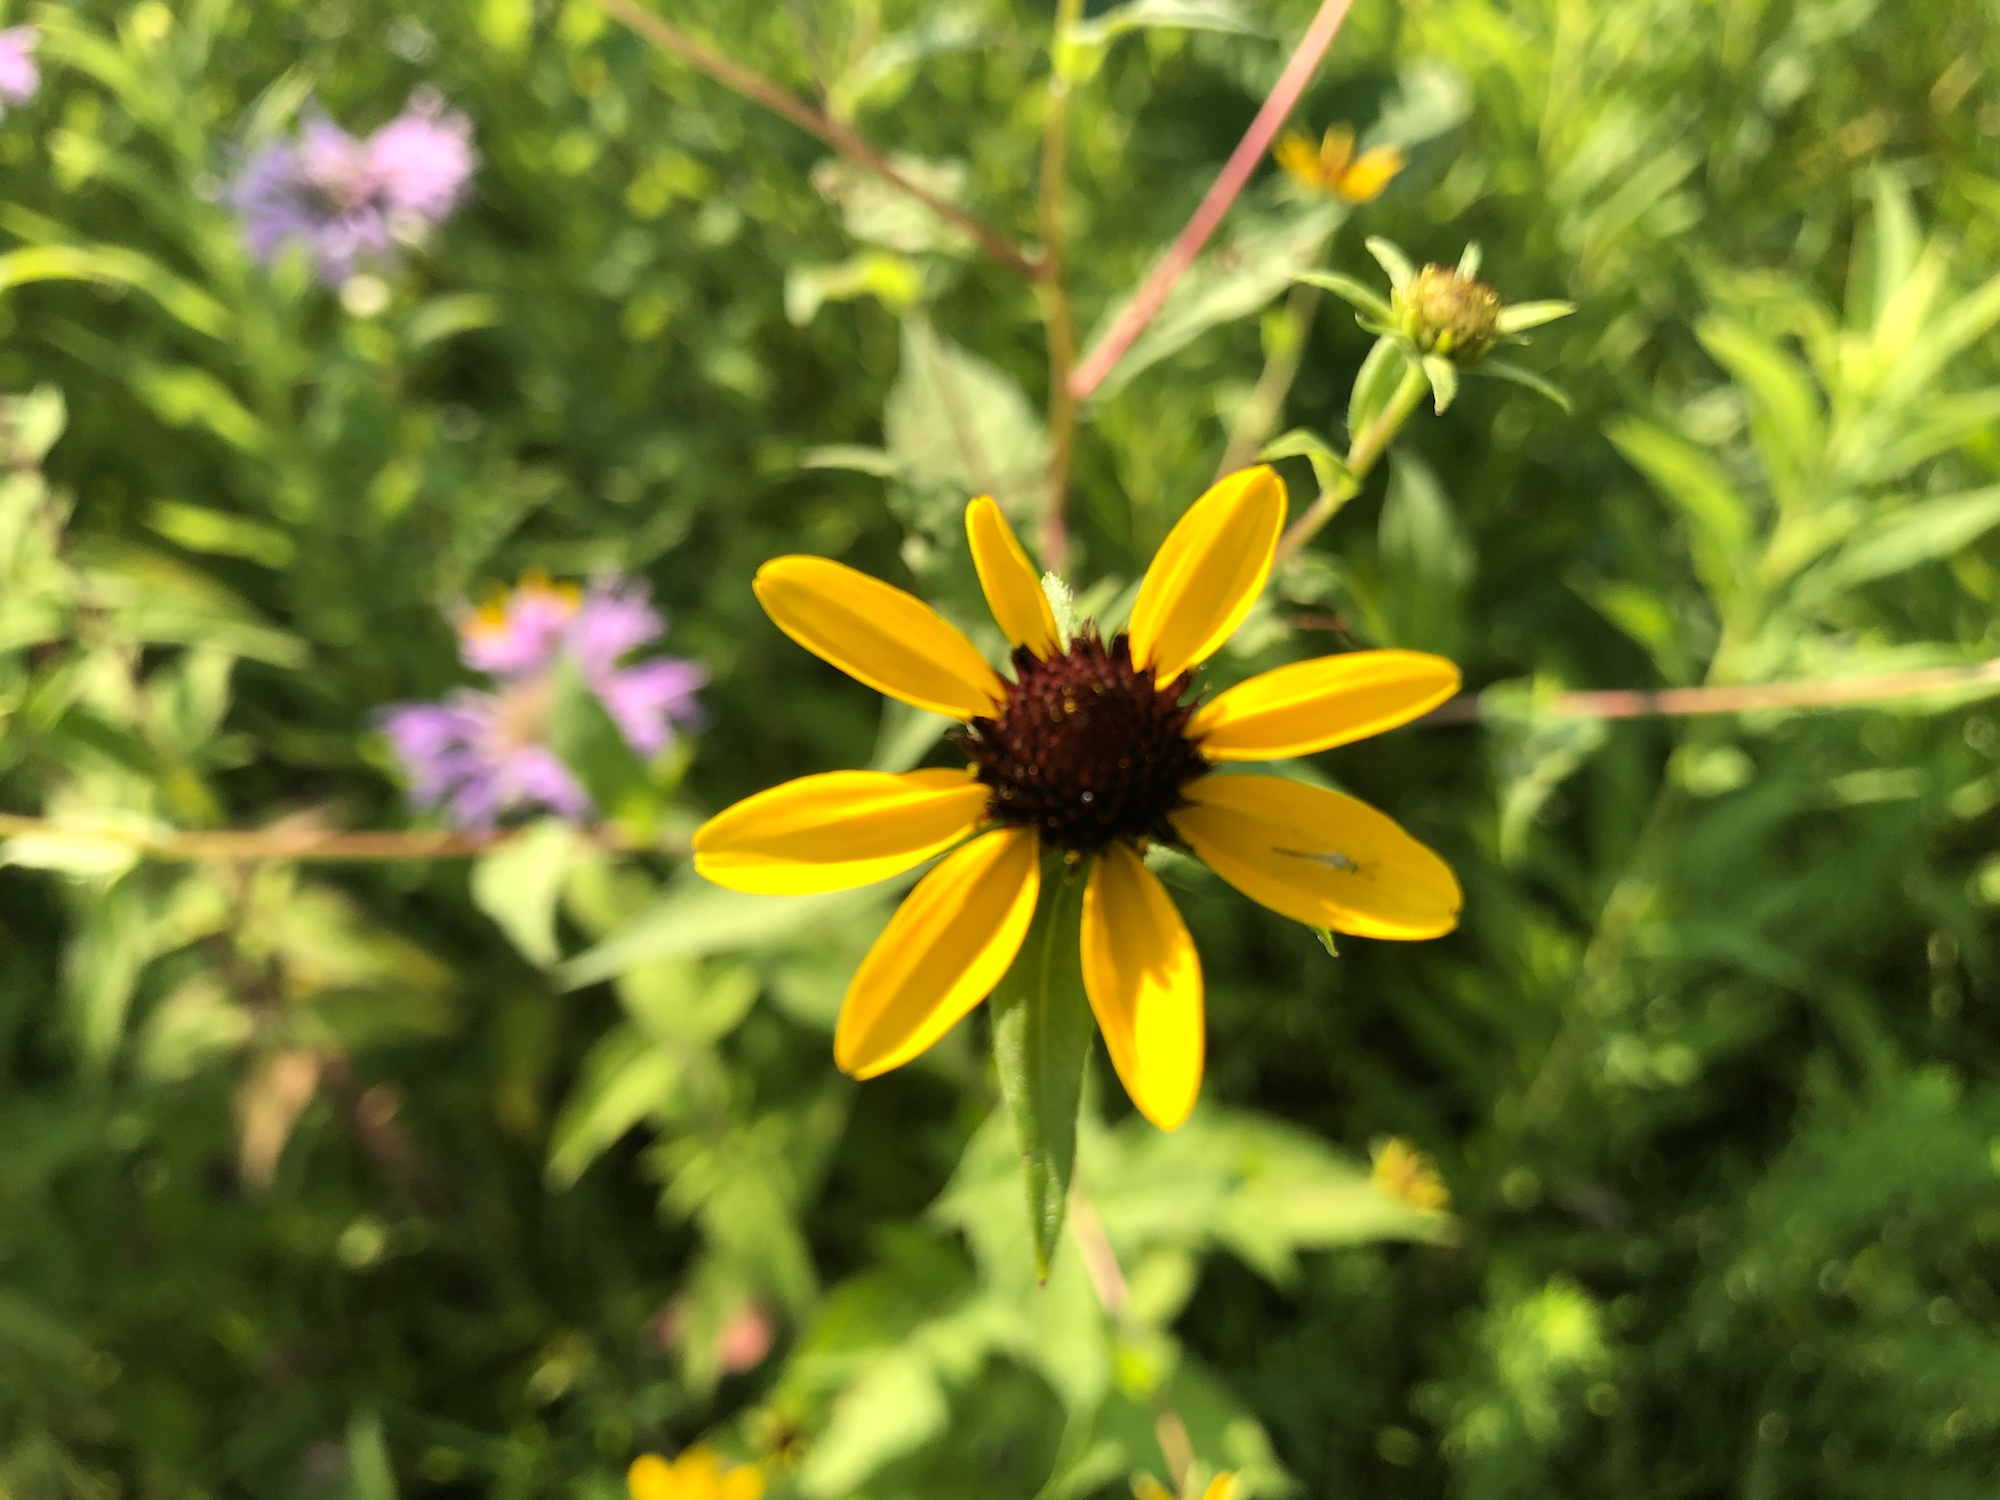 Brown-eyed Susan on banks of retaining pond in Madison, Wisconsin on July 28, 2019.